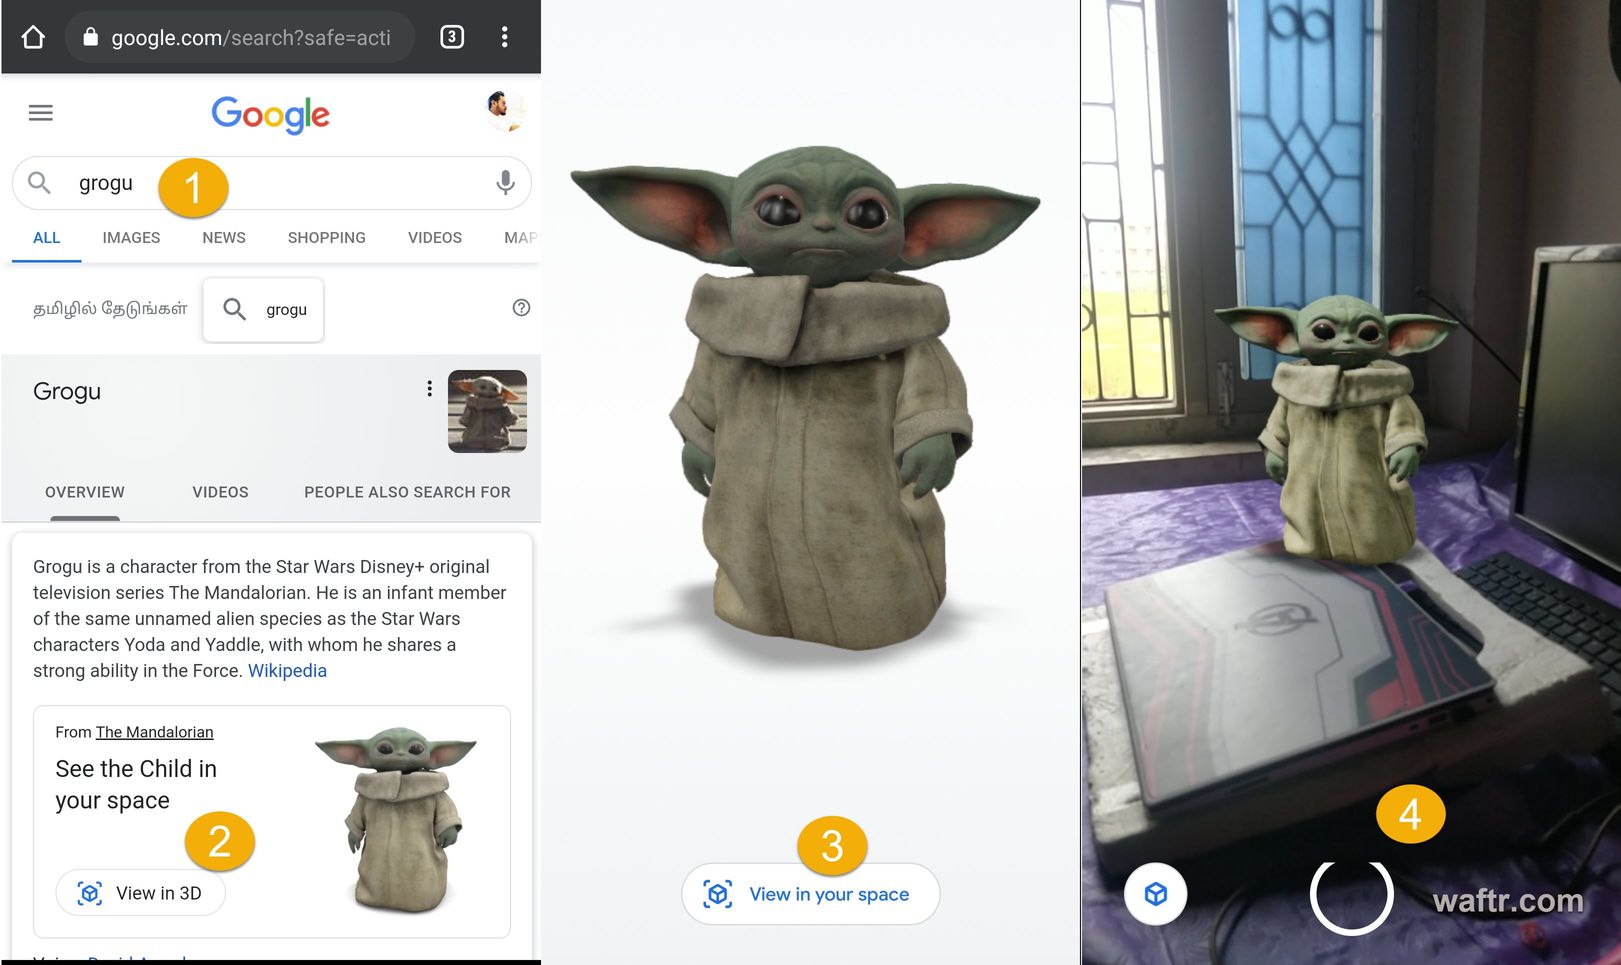 How to See 3D Grogu on Google [iPhone and Android]